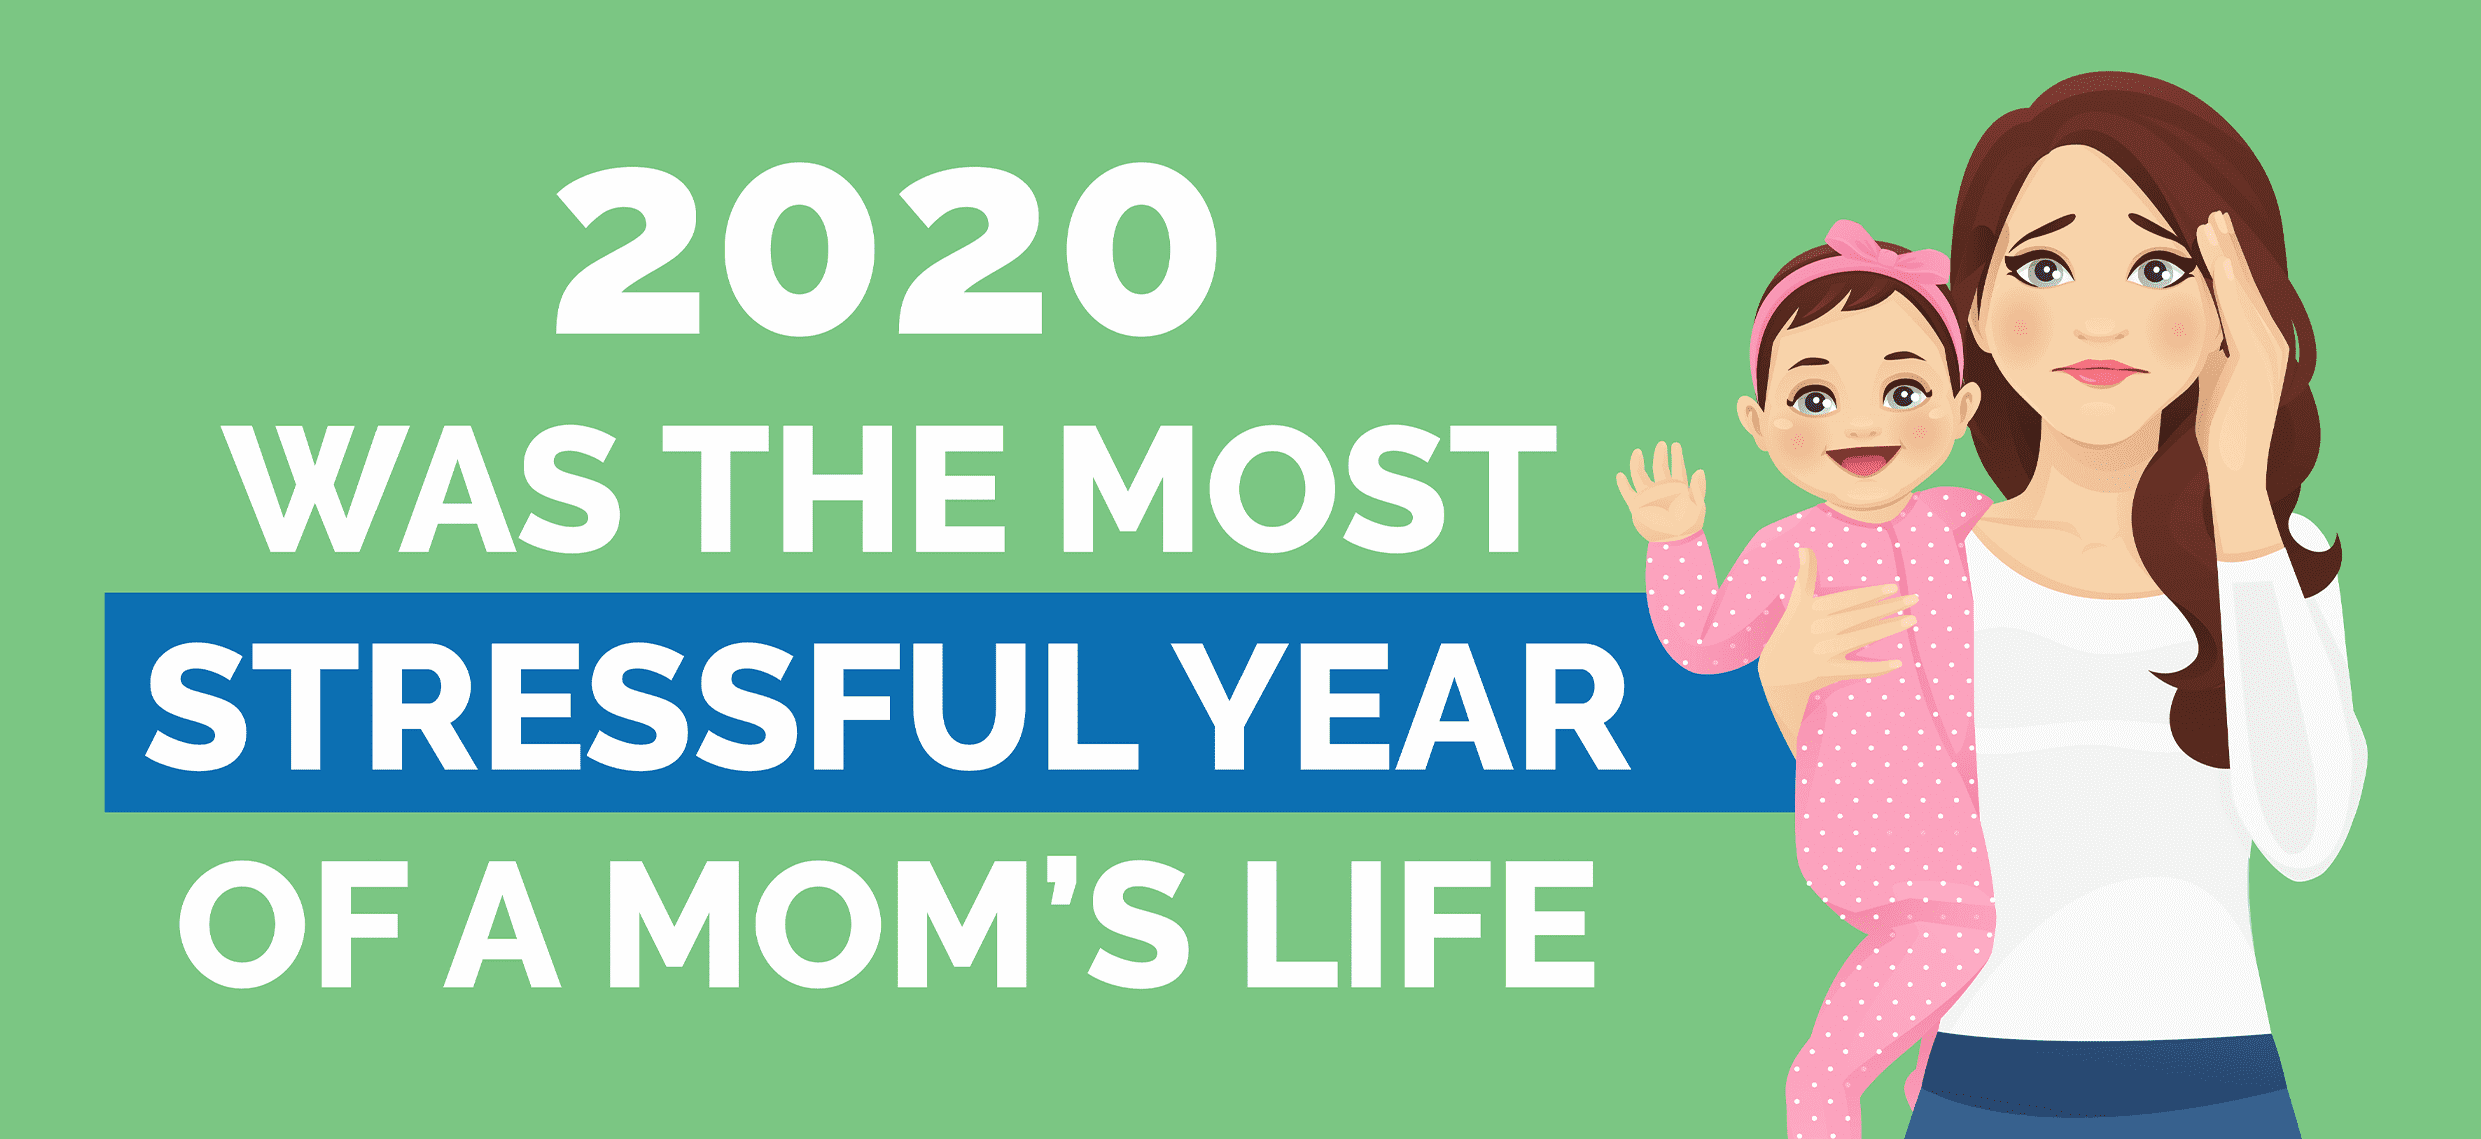 2020 was the most stressful year of a mom's life